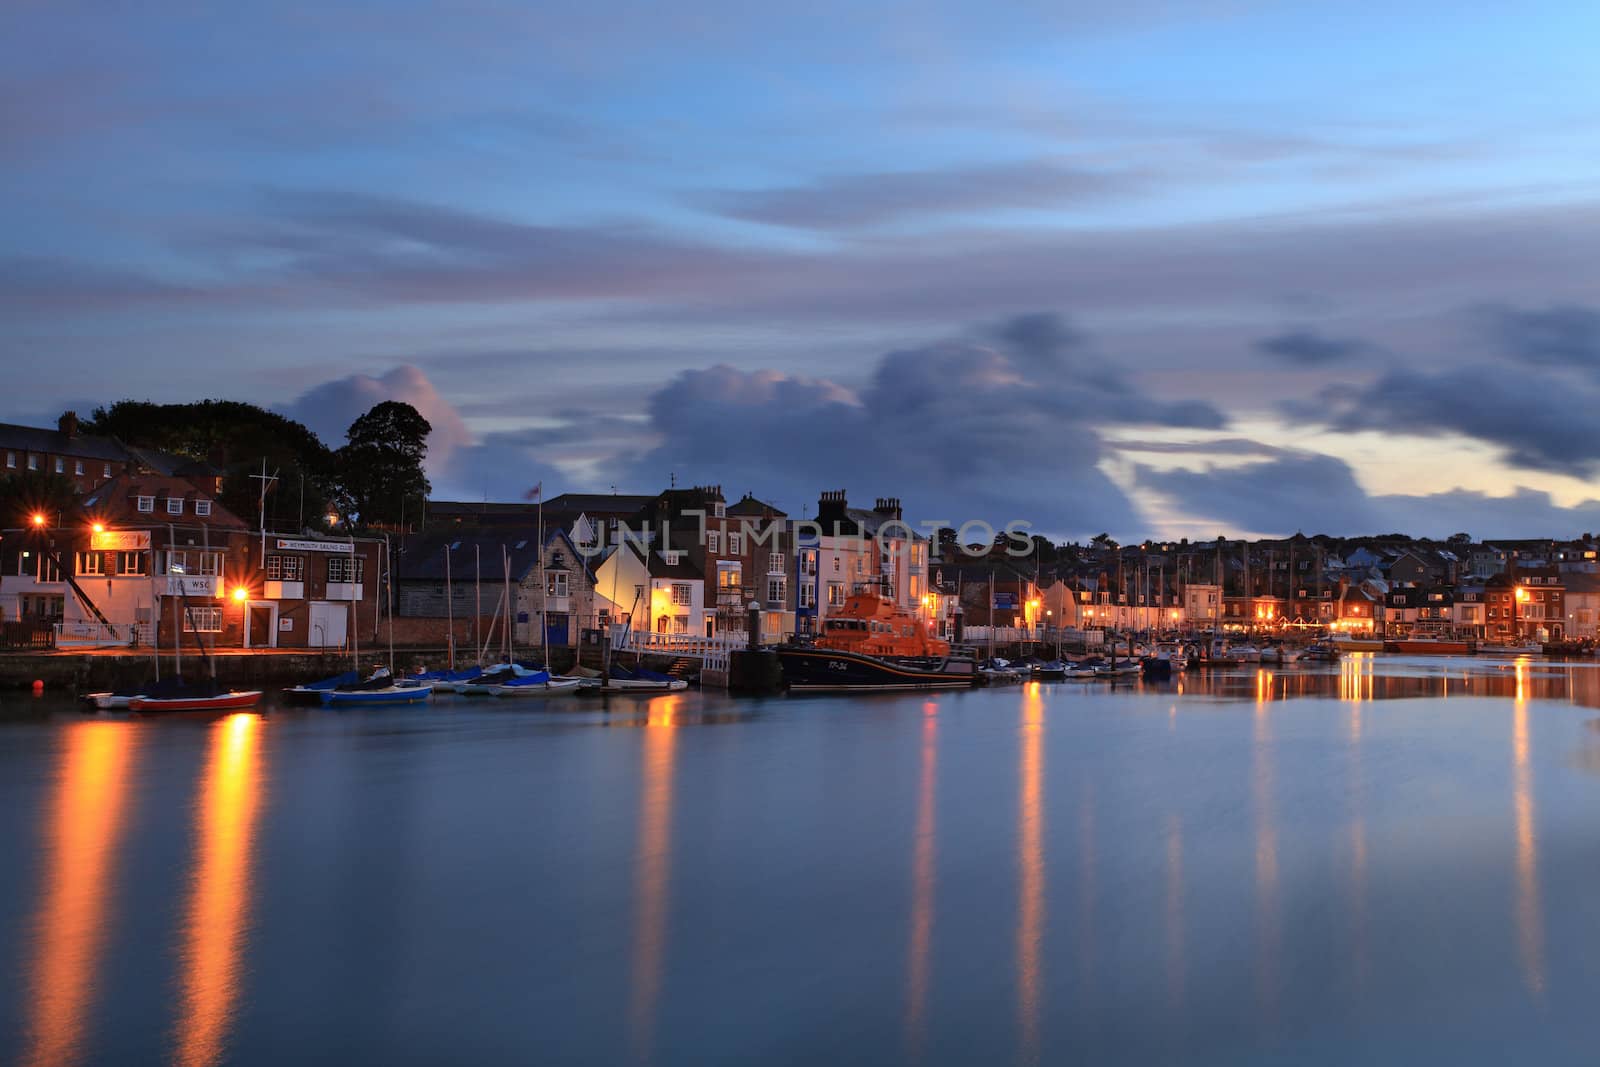 Weymouth Quay During Autumn Nights by olliemt